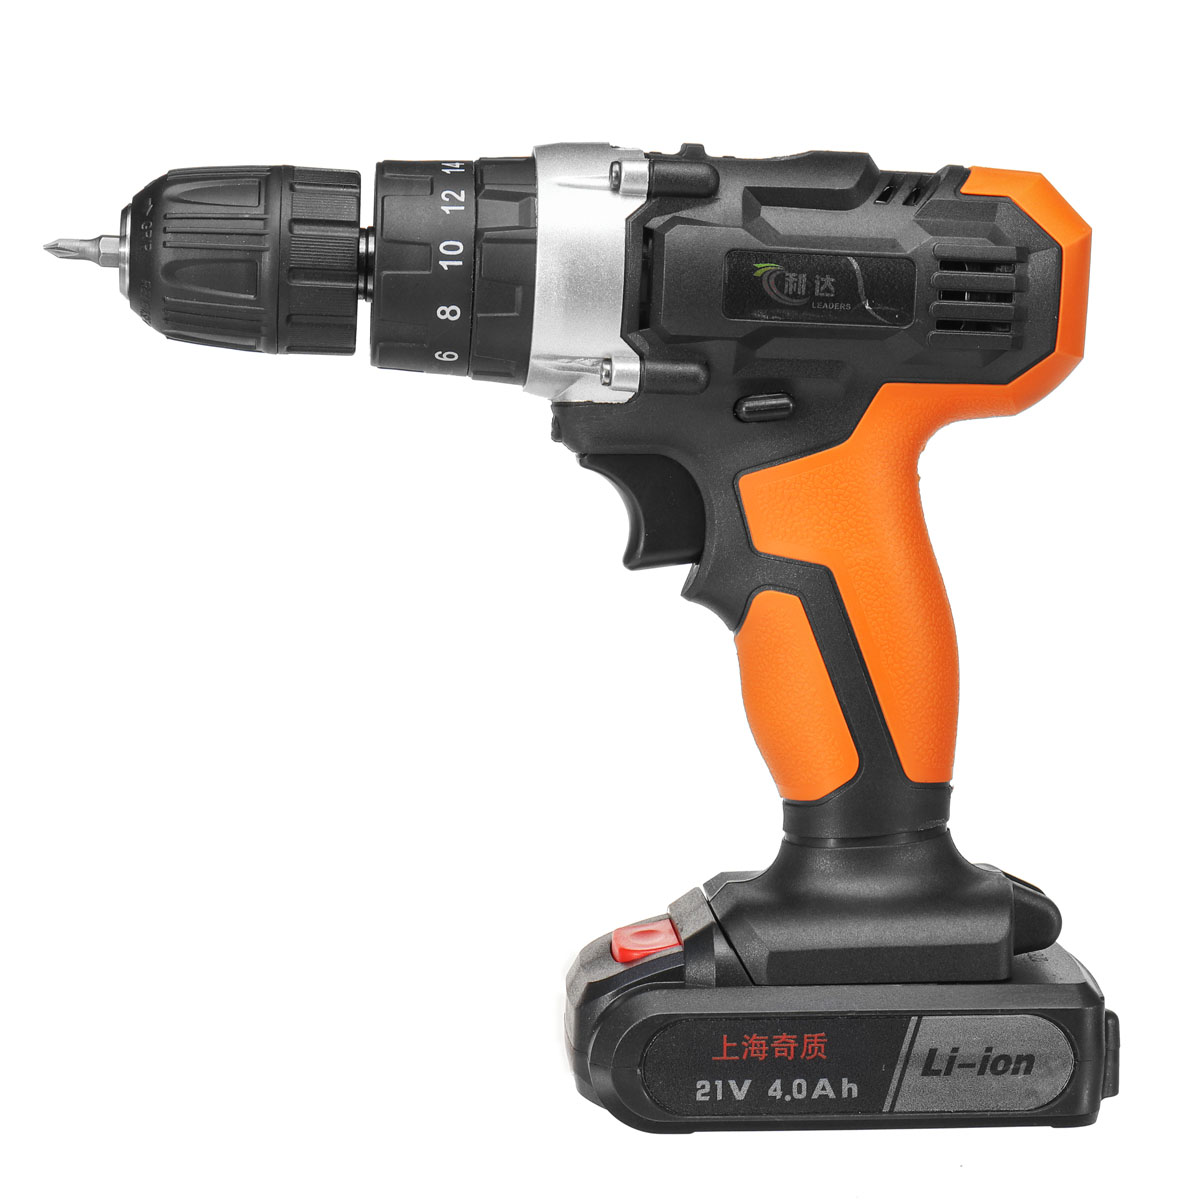 21V-4000mAh-Li-ion-Cordless-Electric-Impact-Drill-183-Clutches-2-Speed-Power-Drills-With-2-Batteries-1412172-3